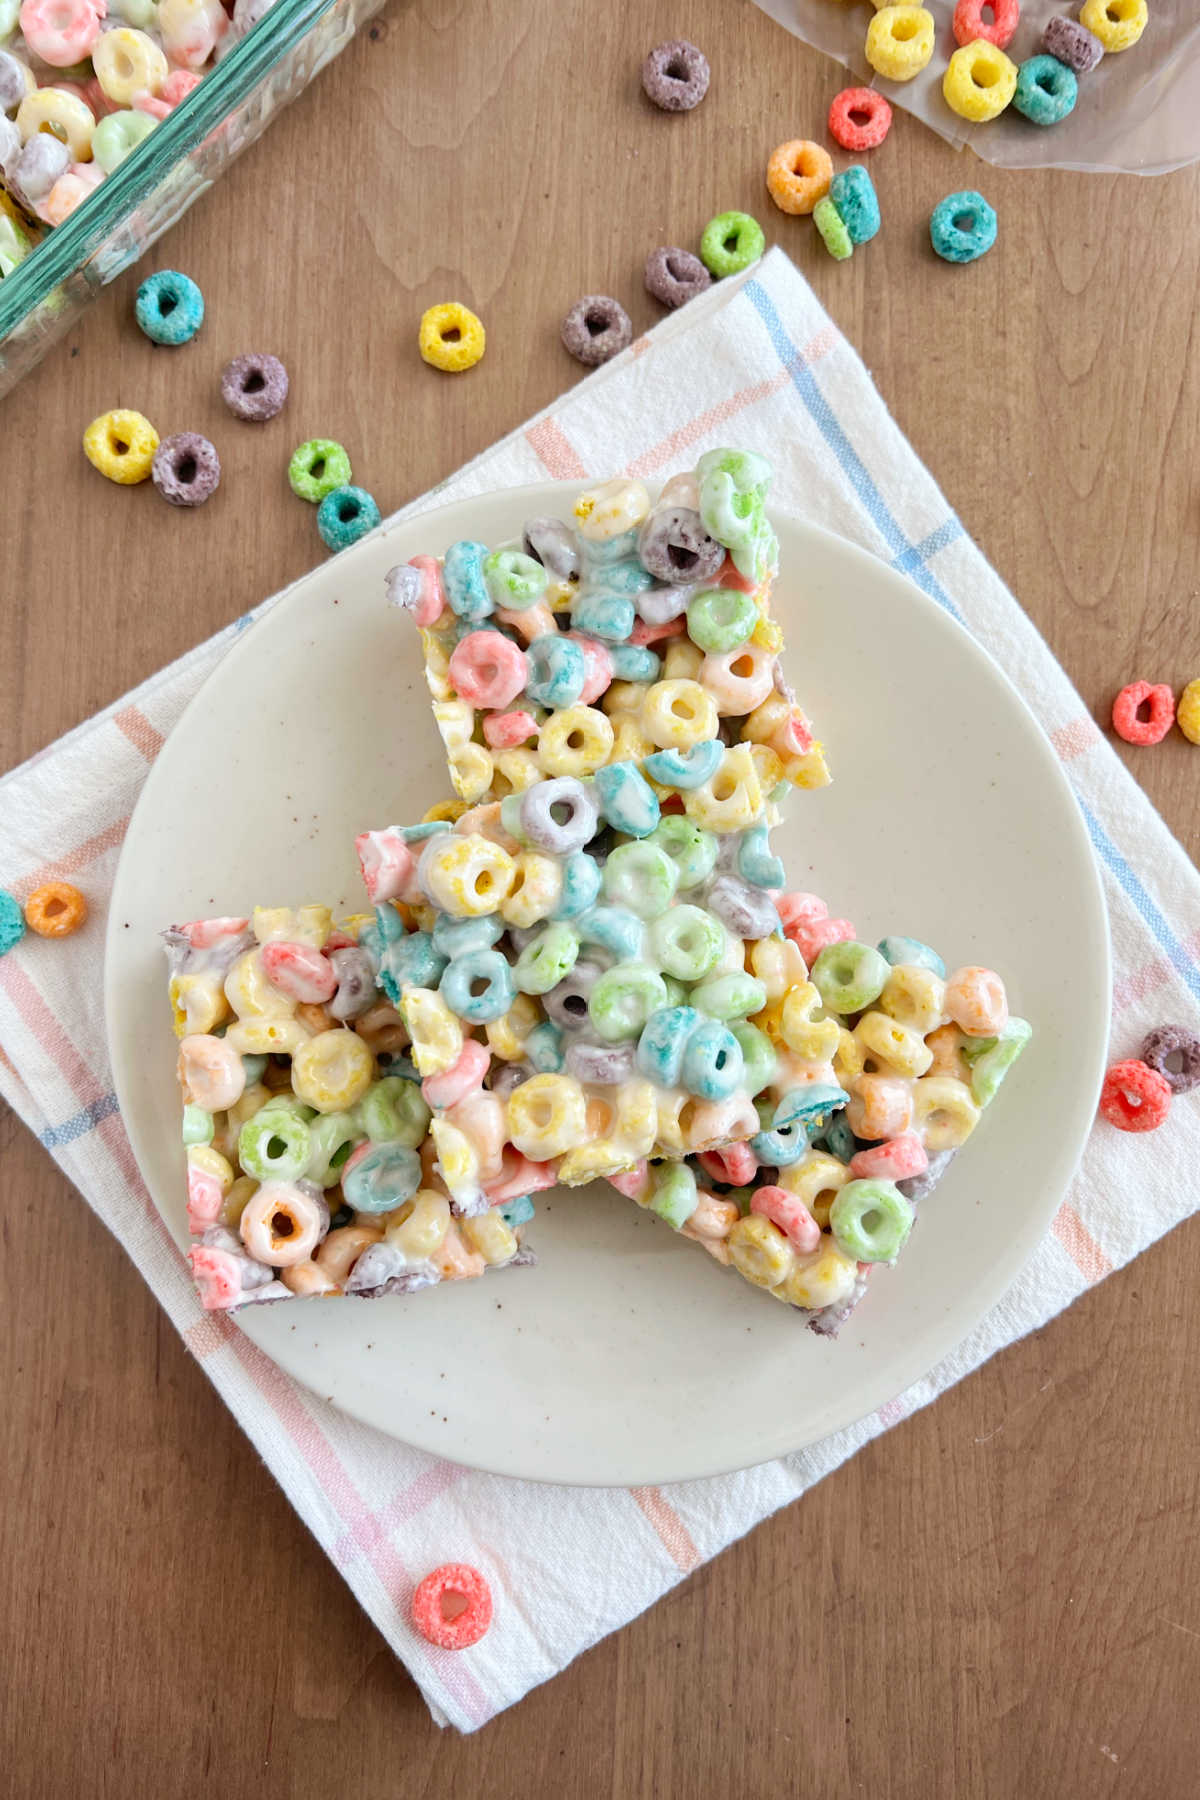 froot loop bars cereal treats made with Froot Loops cereal and marshmallows on a plate